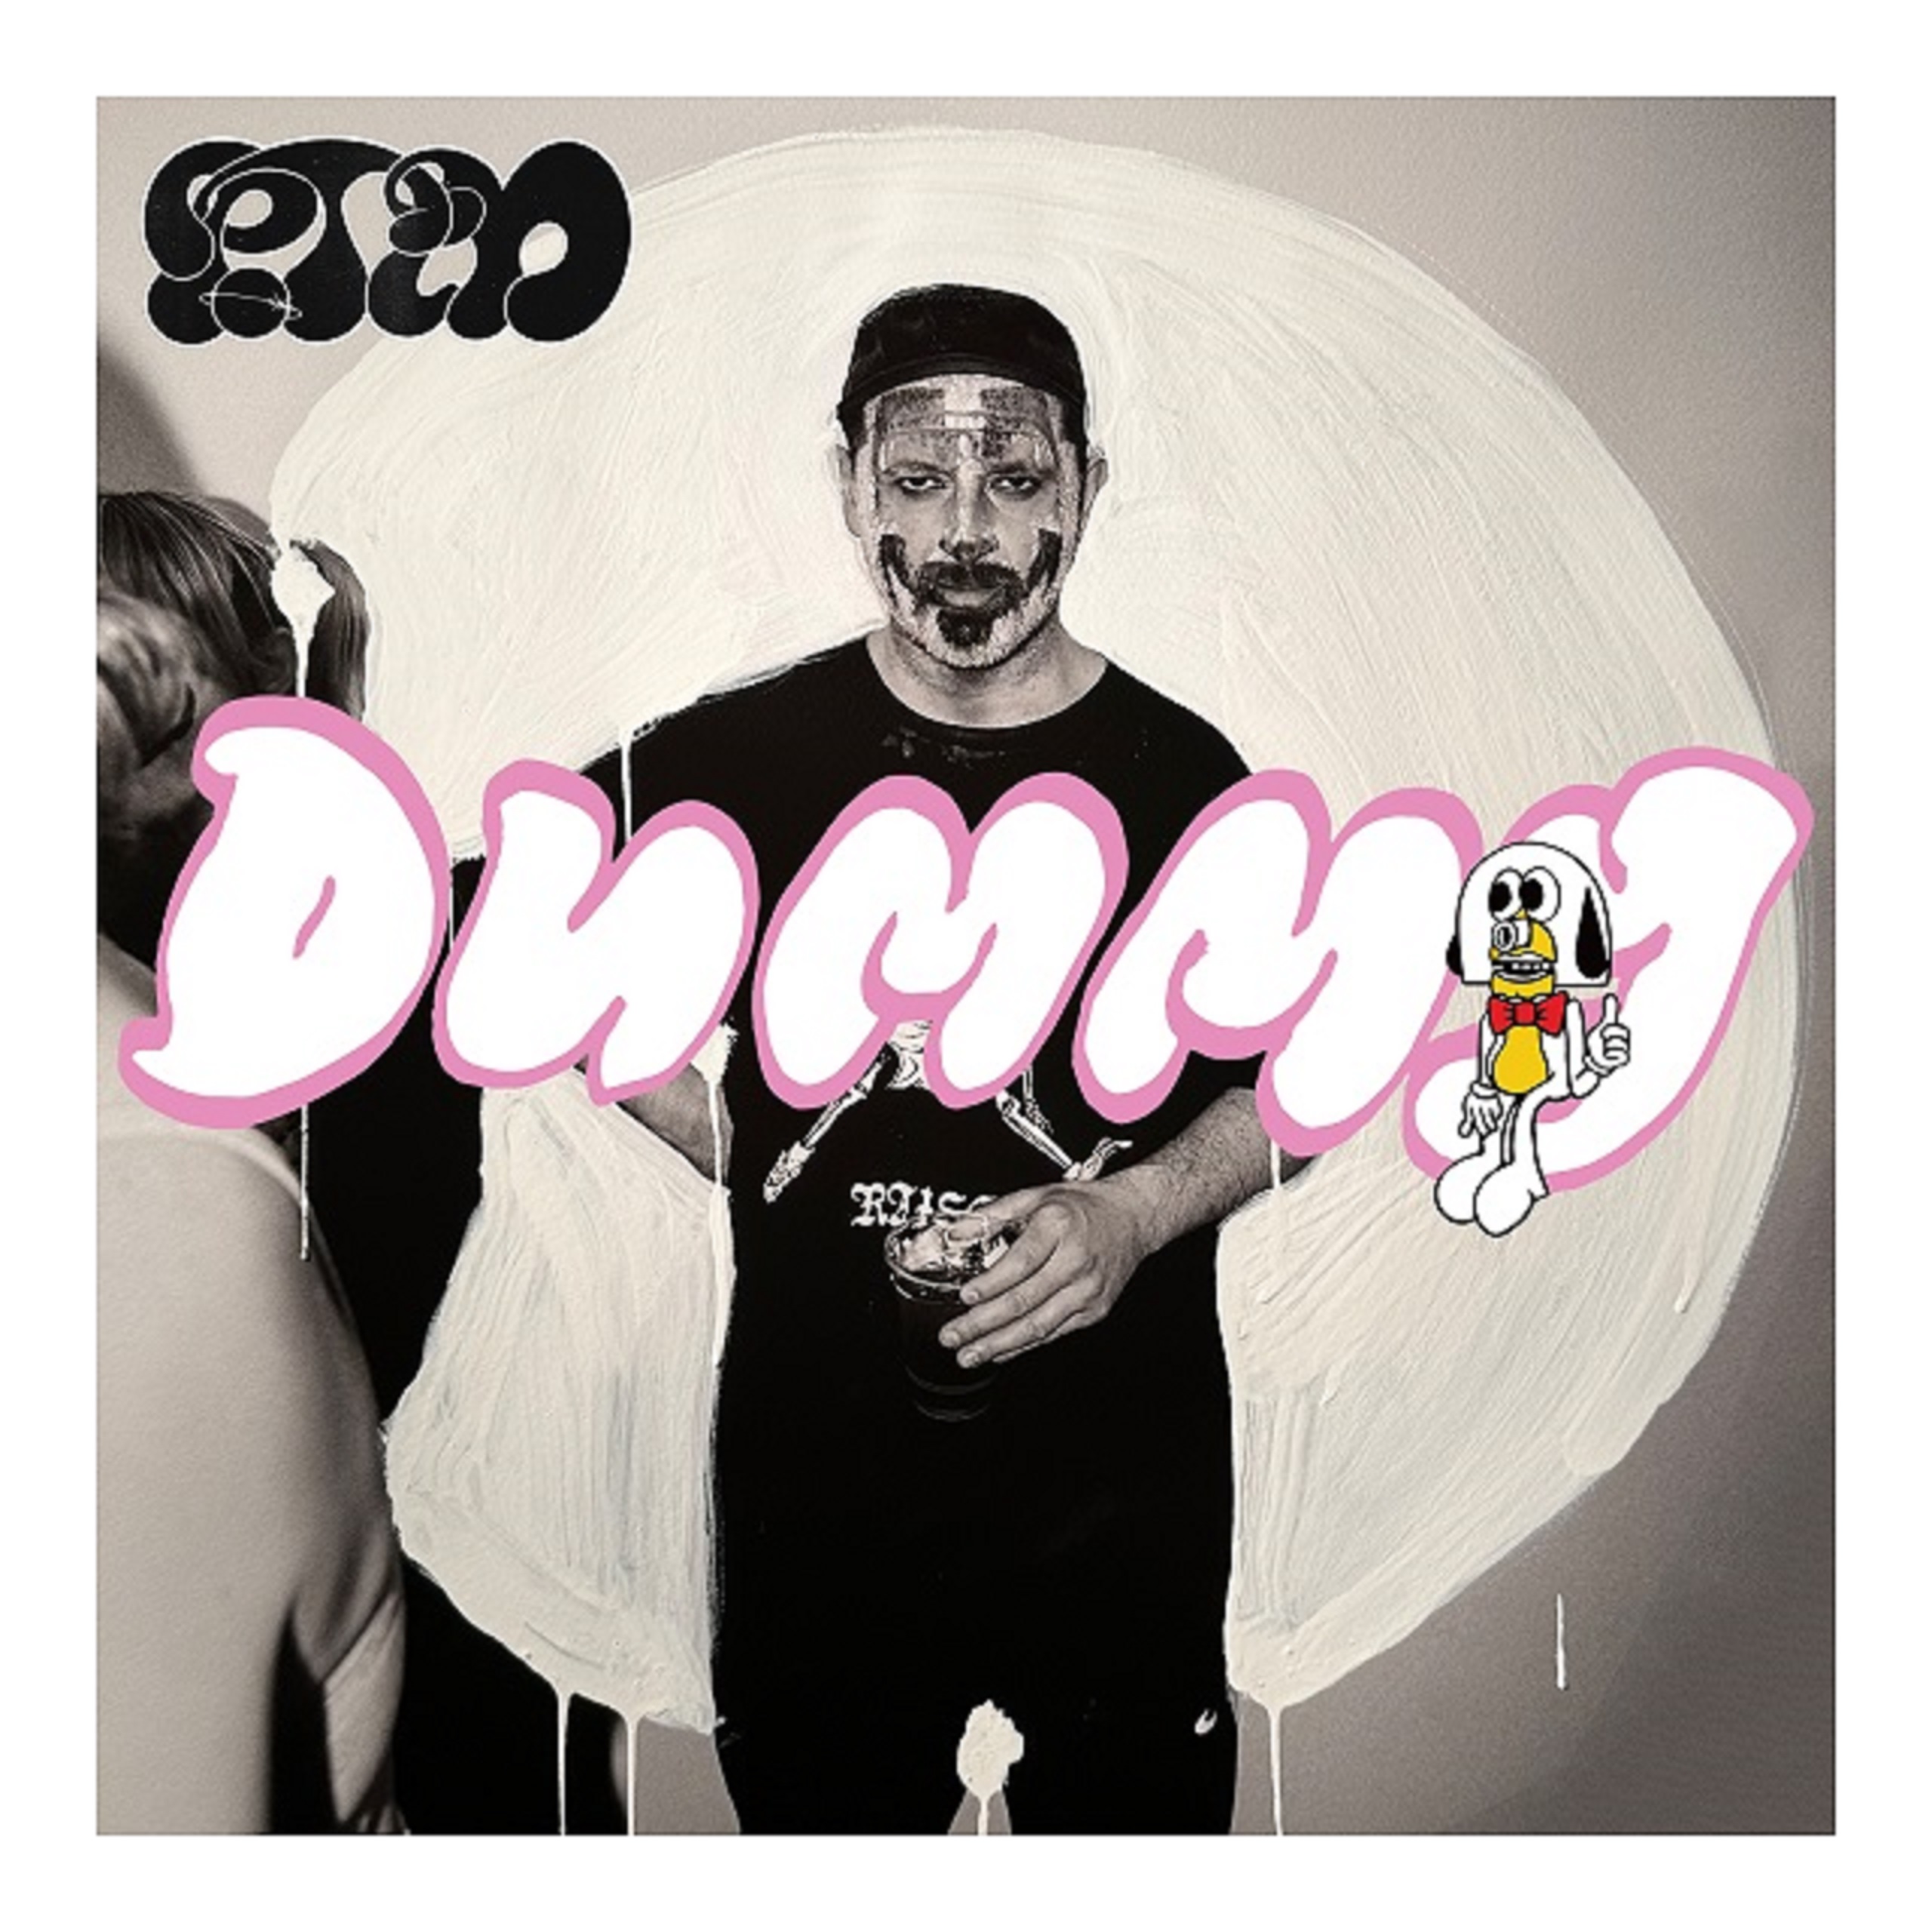 PORTUGAL. THE MAN IS BACK WITH NEW SINGLE "DUMMY" VIA ATLANTIC RECORDS